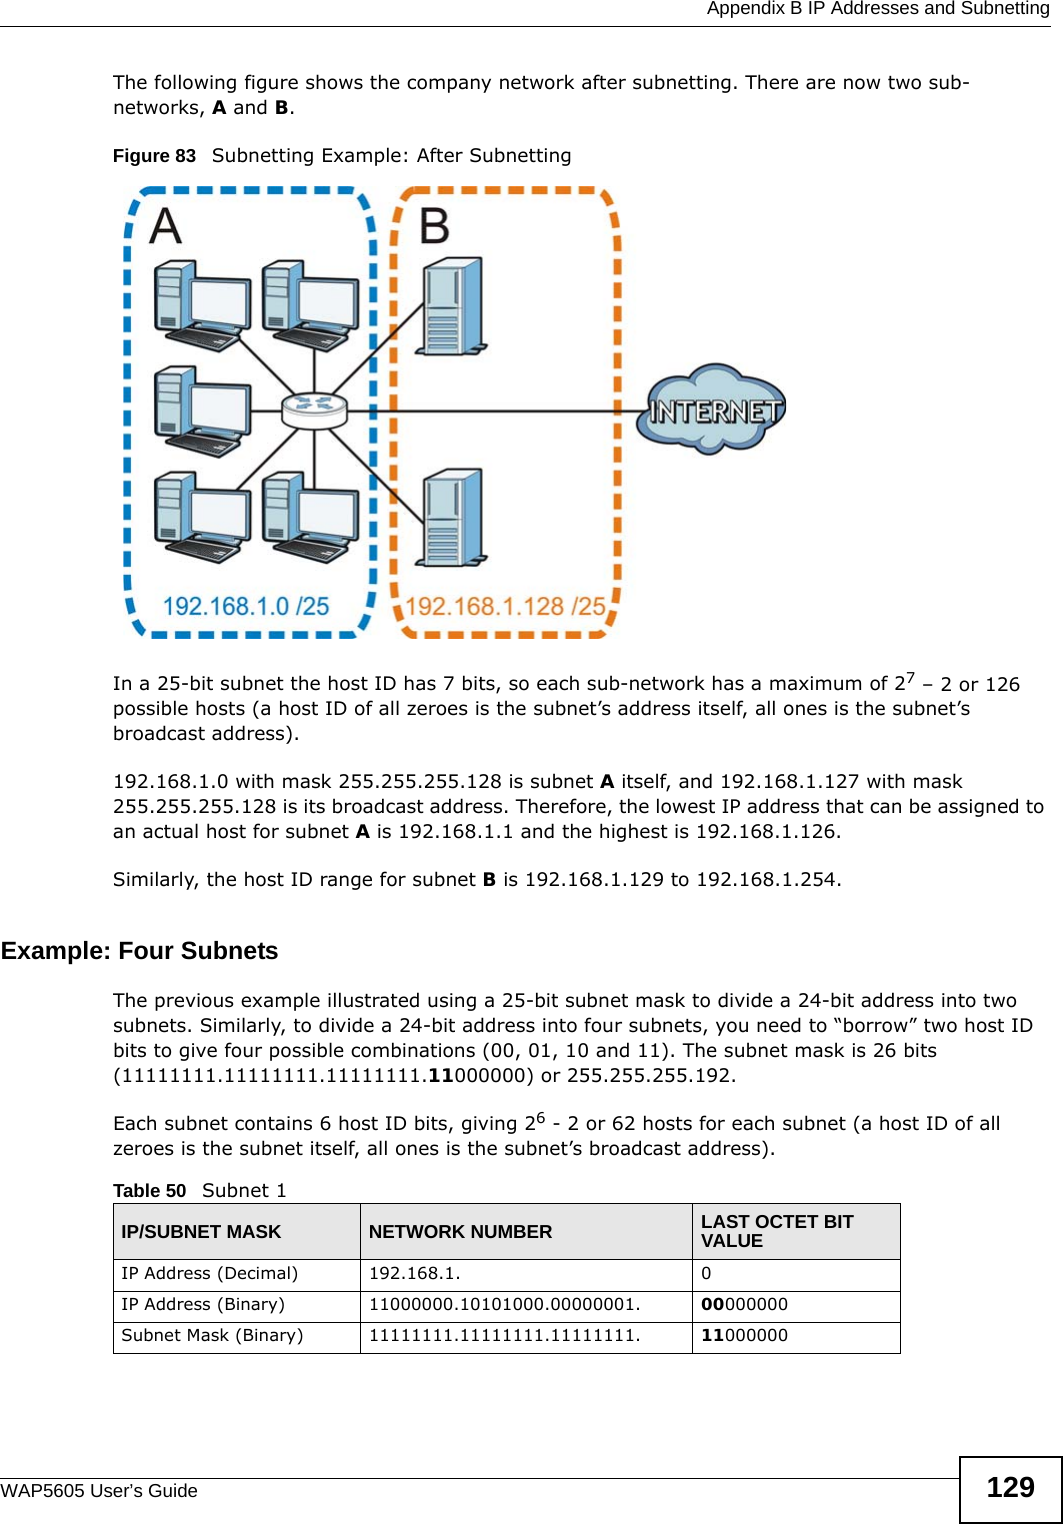  Appendix B IP Addresses and SubnettingWAP5605 User’s Guide 129The following figure shows the company network after subnetting. There are now two sub-networks, A and B. Figure 83   Subnetting Example: After SubnettingIn a 25-bit subnet the host ID has 7 bits, so each sub-network has a maximum of 27 – 2 or 126 possible hosts (a host ID of all zeroes is the subnet’s address itself, all ones is the subnet’s broadcast address).192.168.1.0 with mask 255.255.255.128 is subnet A itself, and 192.168.1.127 with mask 255.255.255.128 is its broadcast address. Therefore, the lowest IP address that can be assigned to an actual host for subnet A is 192.168.1.1 and the highest is 192.168.1.126. Similarly, the host ID range for subnet B is 192.168.1.129 to 192.168.1.254.Example: Four Subnets The previous example illustrated using a 25-bit subnet mask to divide a 24-bit address into two subnets. Similarly, to divide a 24-bit address into four subnets, you need to “borrow” two host ID bits to give four possible combinations (00, 01, 10 and 11). The subnet mask is 26 bits (11111111.11111111.11111111.11000000) or 255.255.255.192. Each subnet contains 6 host ID bits, giving 26 - 2 or 62 hosts for each subnet (a host ID of all zeroes is the subnet itself, all ones is the subnet’s broadcast address). Table 50   Subnet 1IP/SUBNET MASK NETWORK NUMBER LAST OCTET BIT VALUEIP Address (Decimal) 192.168.1. 0IP Address (Binary) 11000000.10101000.00000001. 00000000Subnet Mask (Binary) 11111111.11111111.11111111. 11000000